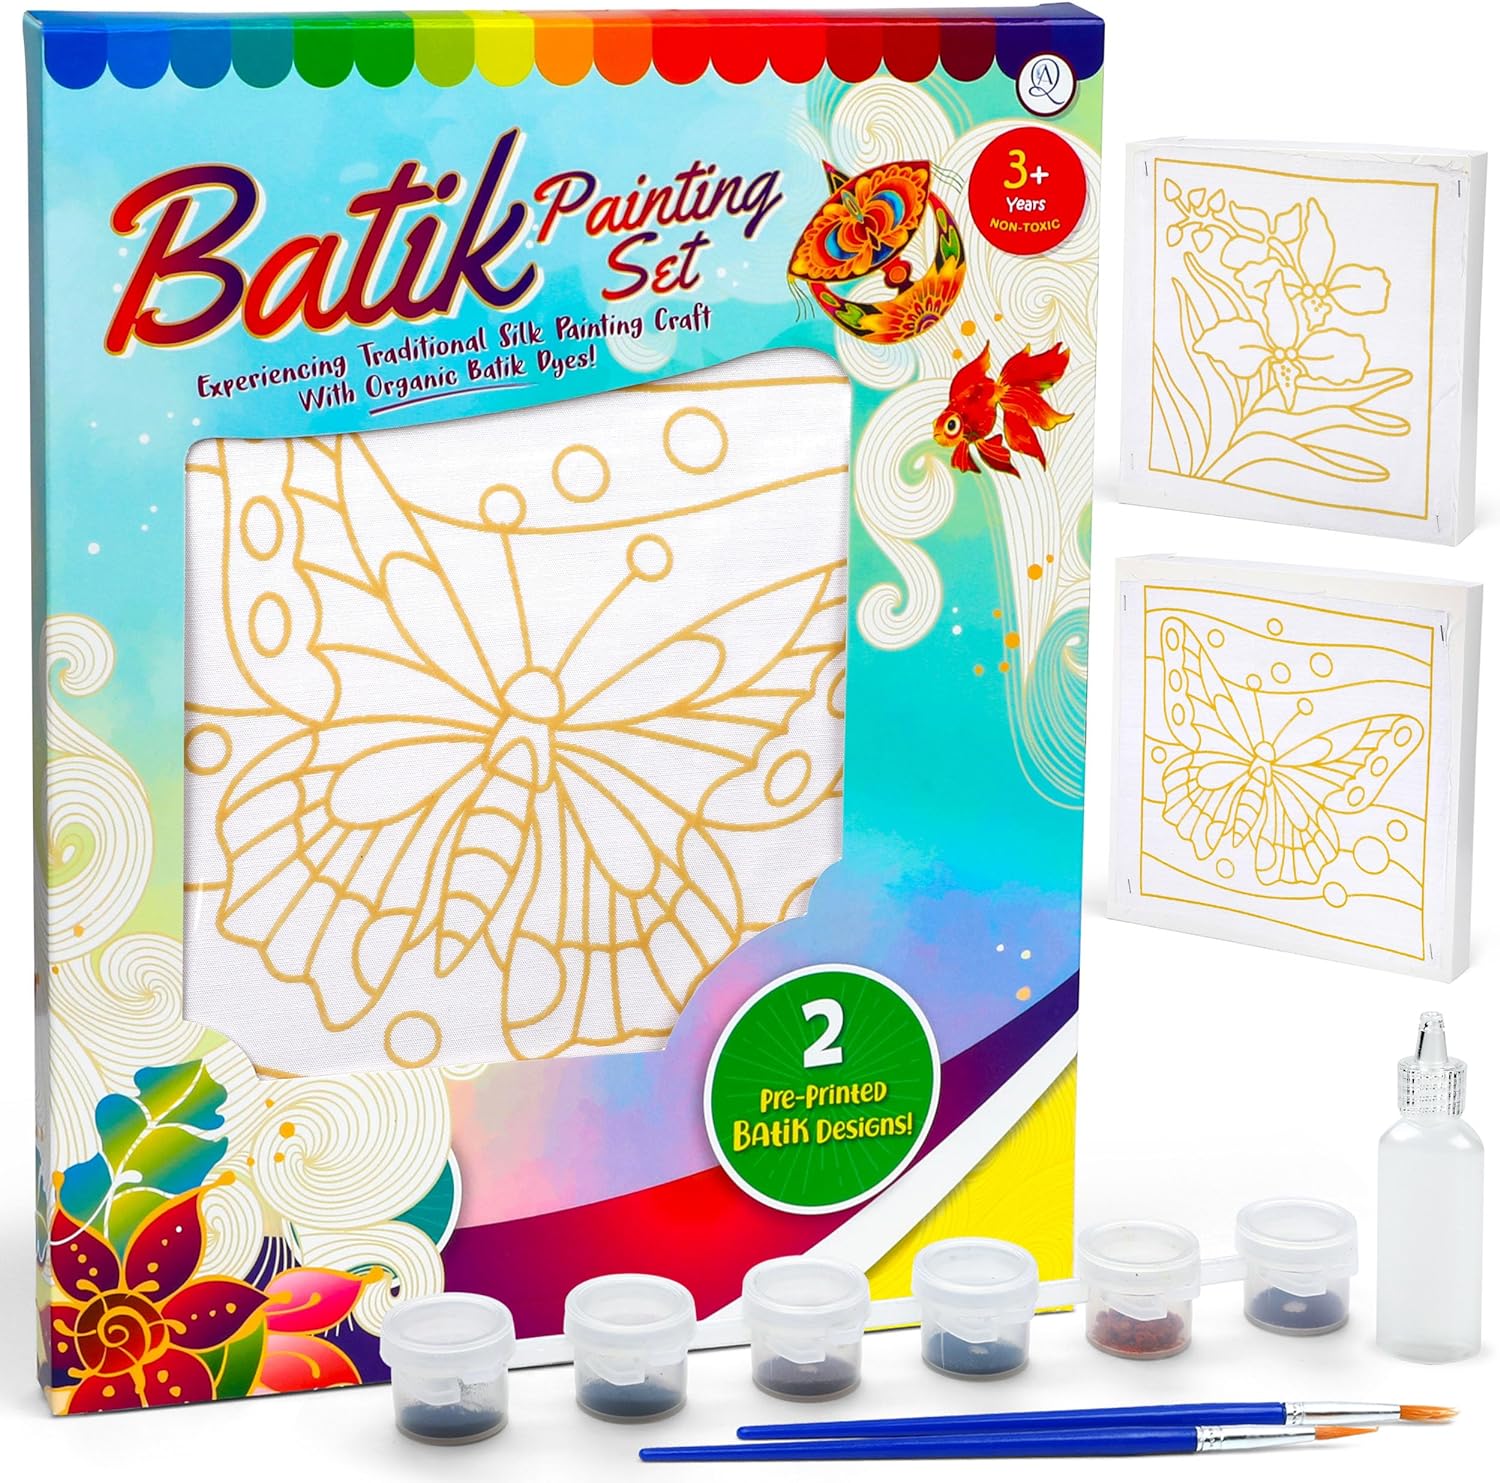 Malaysian Batik Organic Colors Painting 2-in-1 Kit (Butterfly, Orchid Flower) – Art Craft Painting Activity Kit Set for Adults and Kids